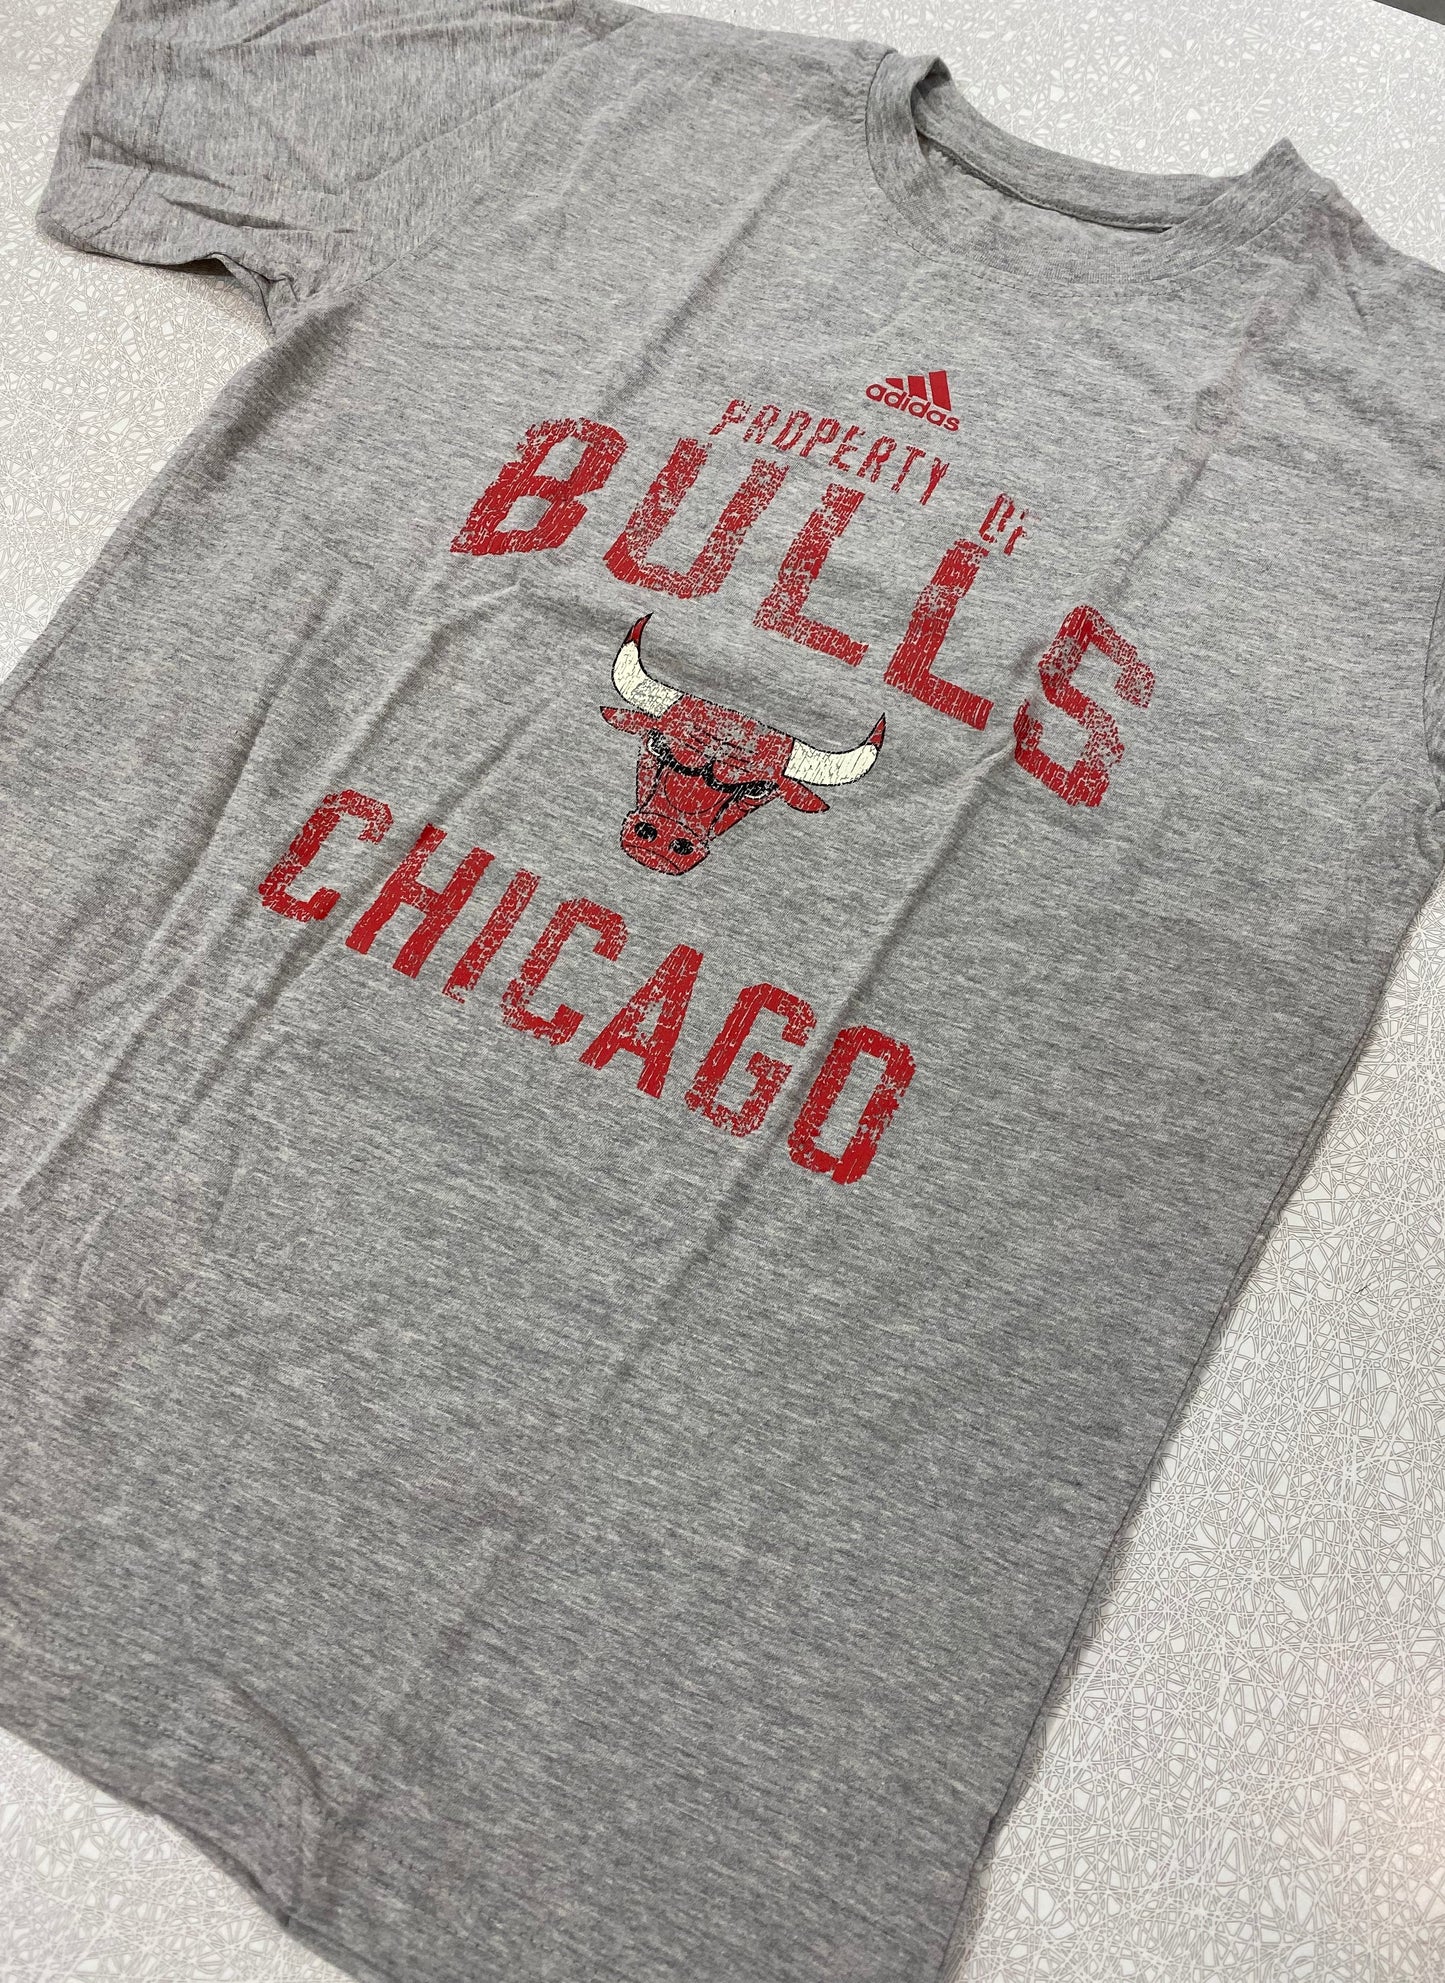 Youth Chicago Bulls Property Of Tee